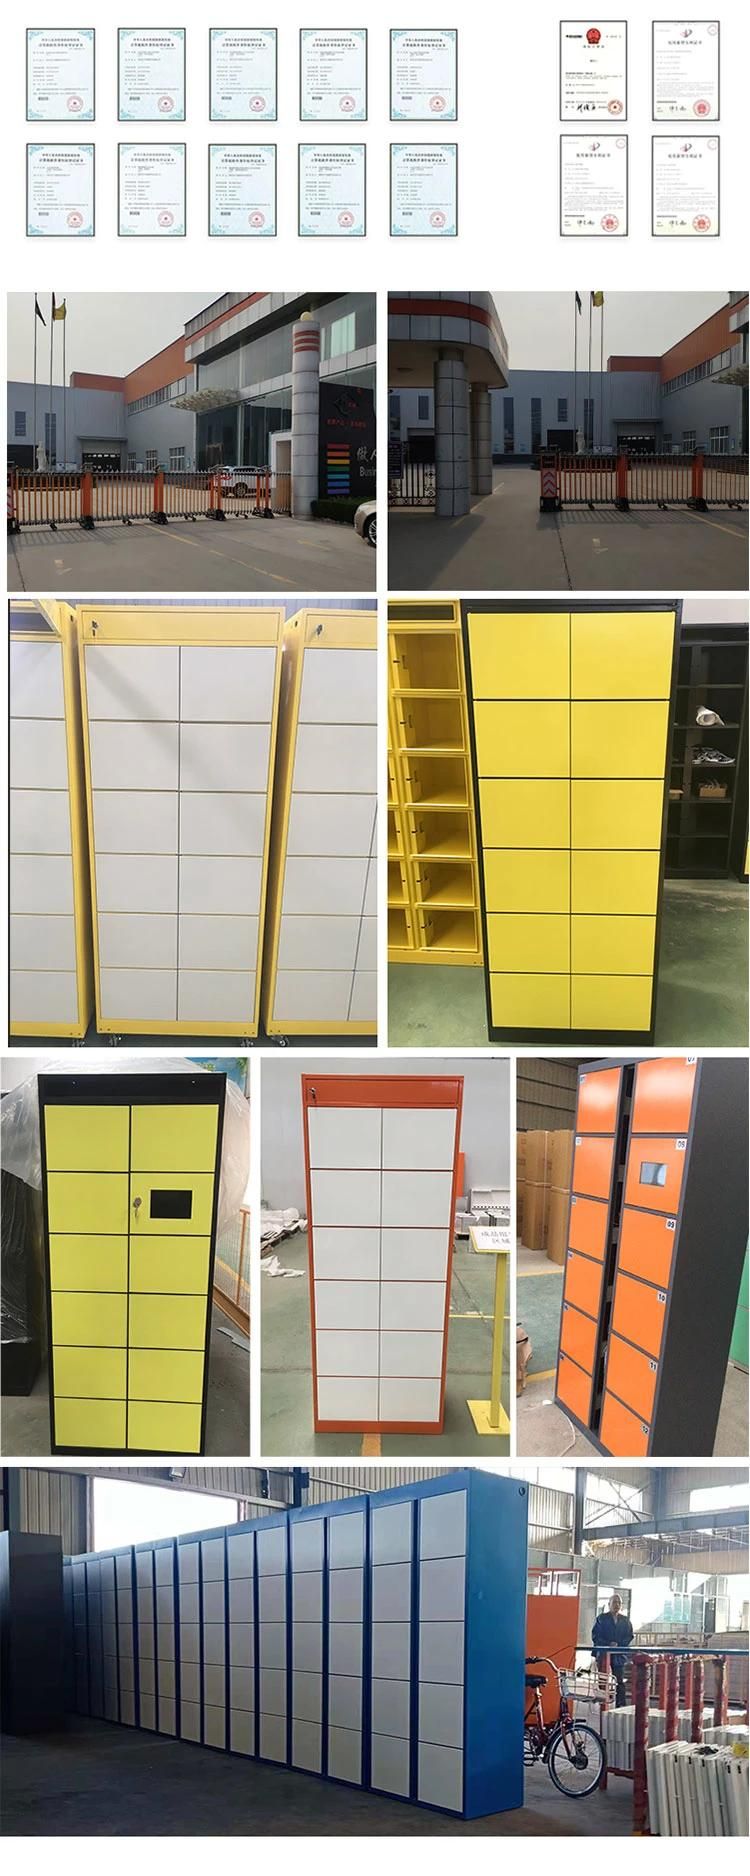 The Baiwei Factory Produces Smart Phone Charging Cabinets with Facial Recognition and Swiped Card